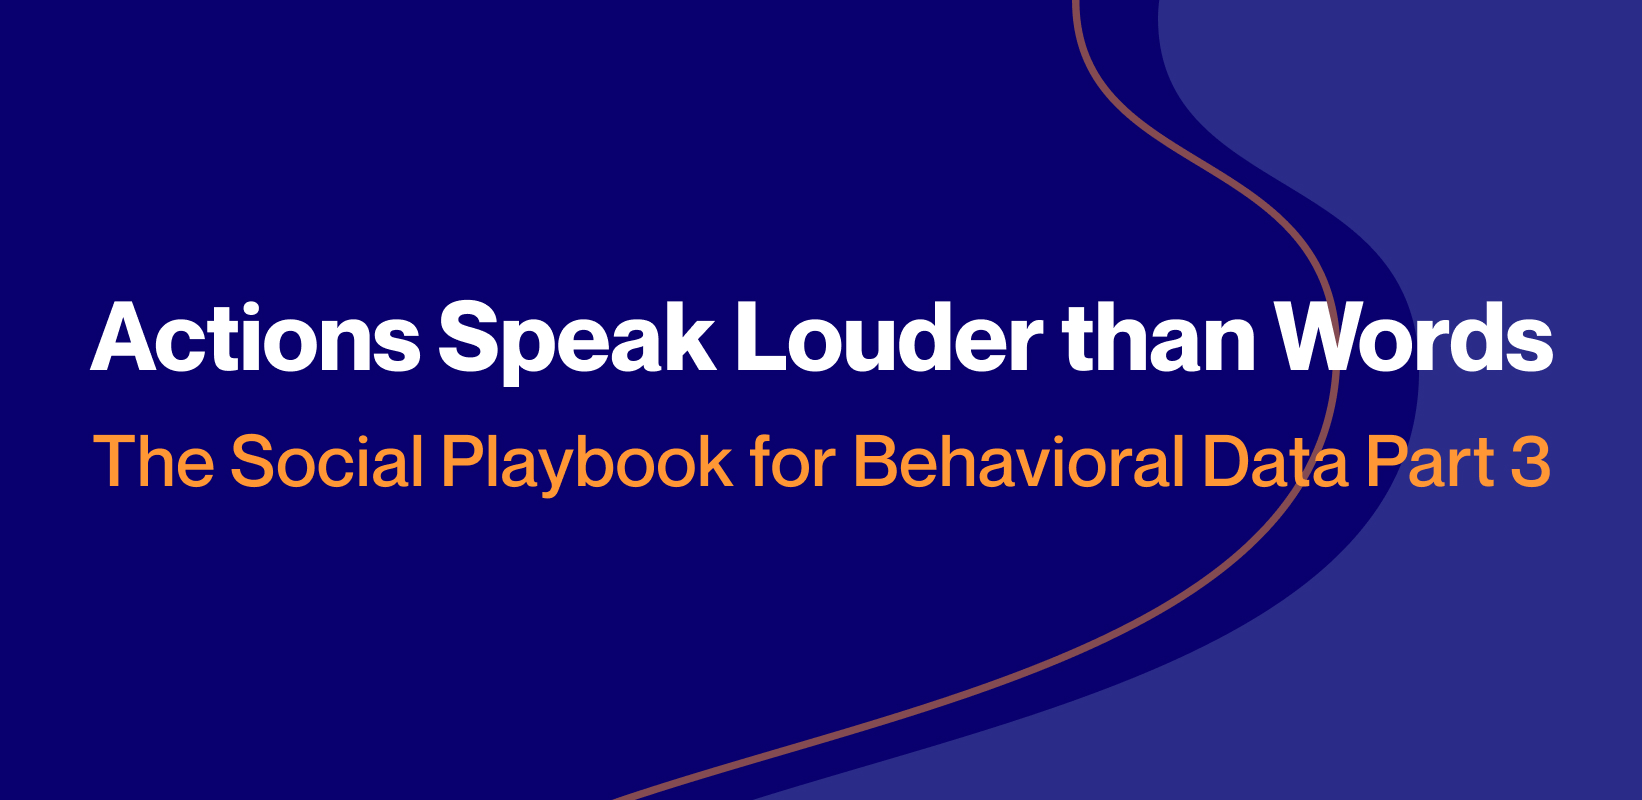 [Part 3/4] Actions Speak Louder than Words: The Social Playbook for Behavioral Data